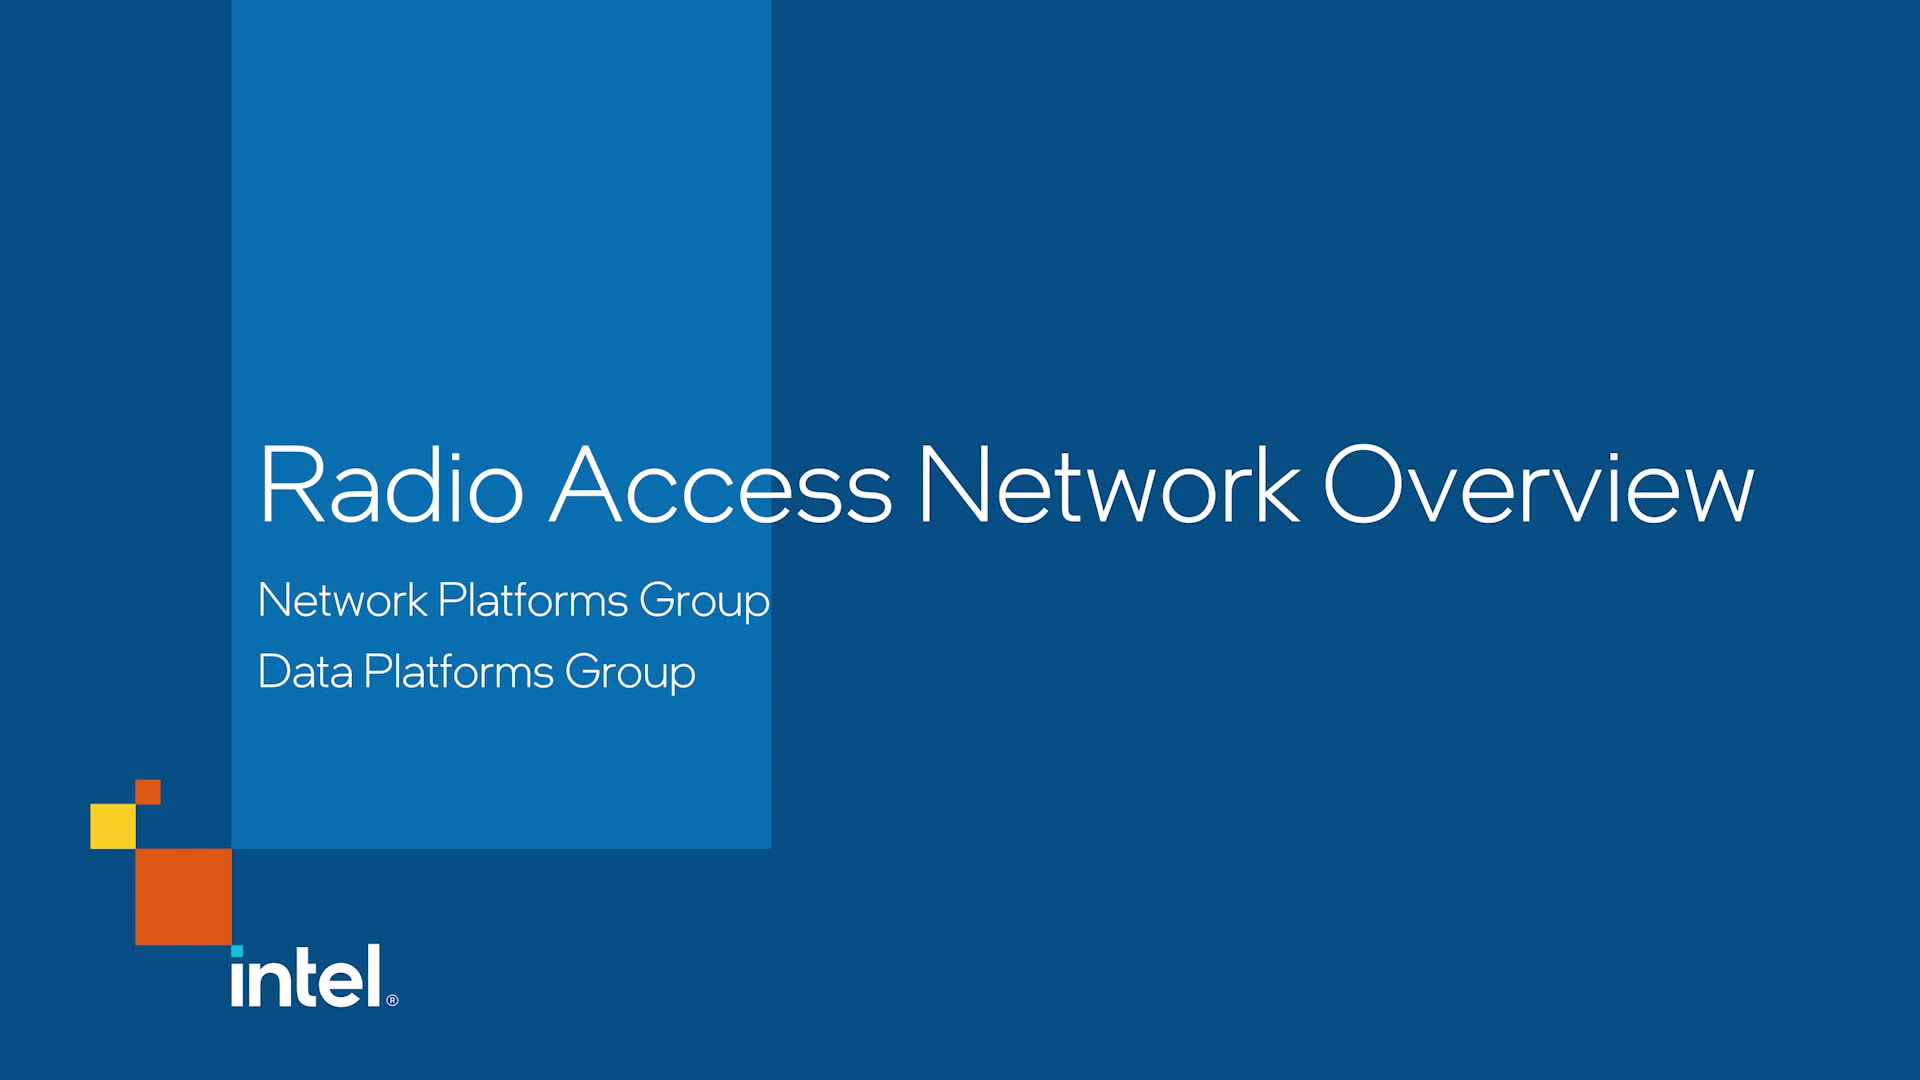 Chapter 1: Radio Access Network Overview